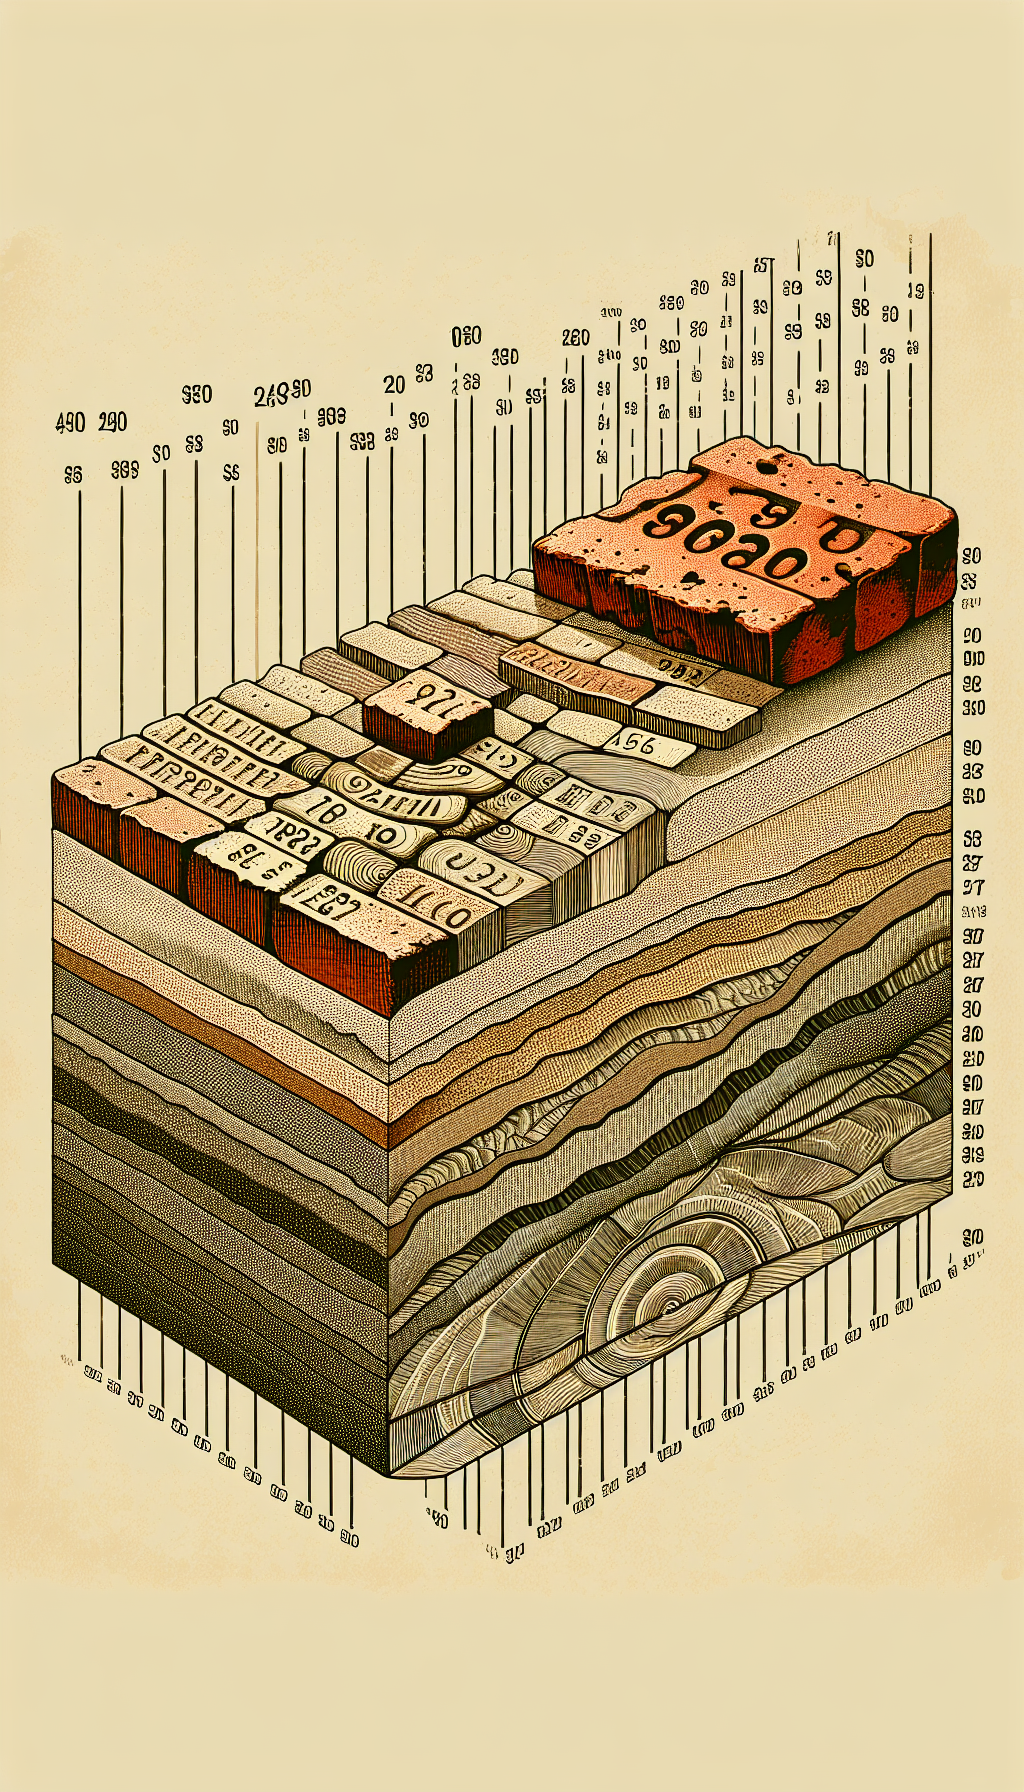 An illustration depicts an antique brick partially excavated from layers of soil, revealing its age rings like a tree, with each layer labeled with different historical epochs. Prices ascend skyward from the brick like building blocks, signifying the brick's escalating value with its age and origin, blending a vintage style engraving with modern vector elements to symbolize the fusion of past and present values.